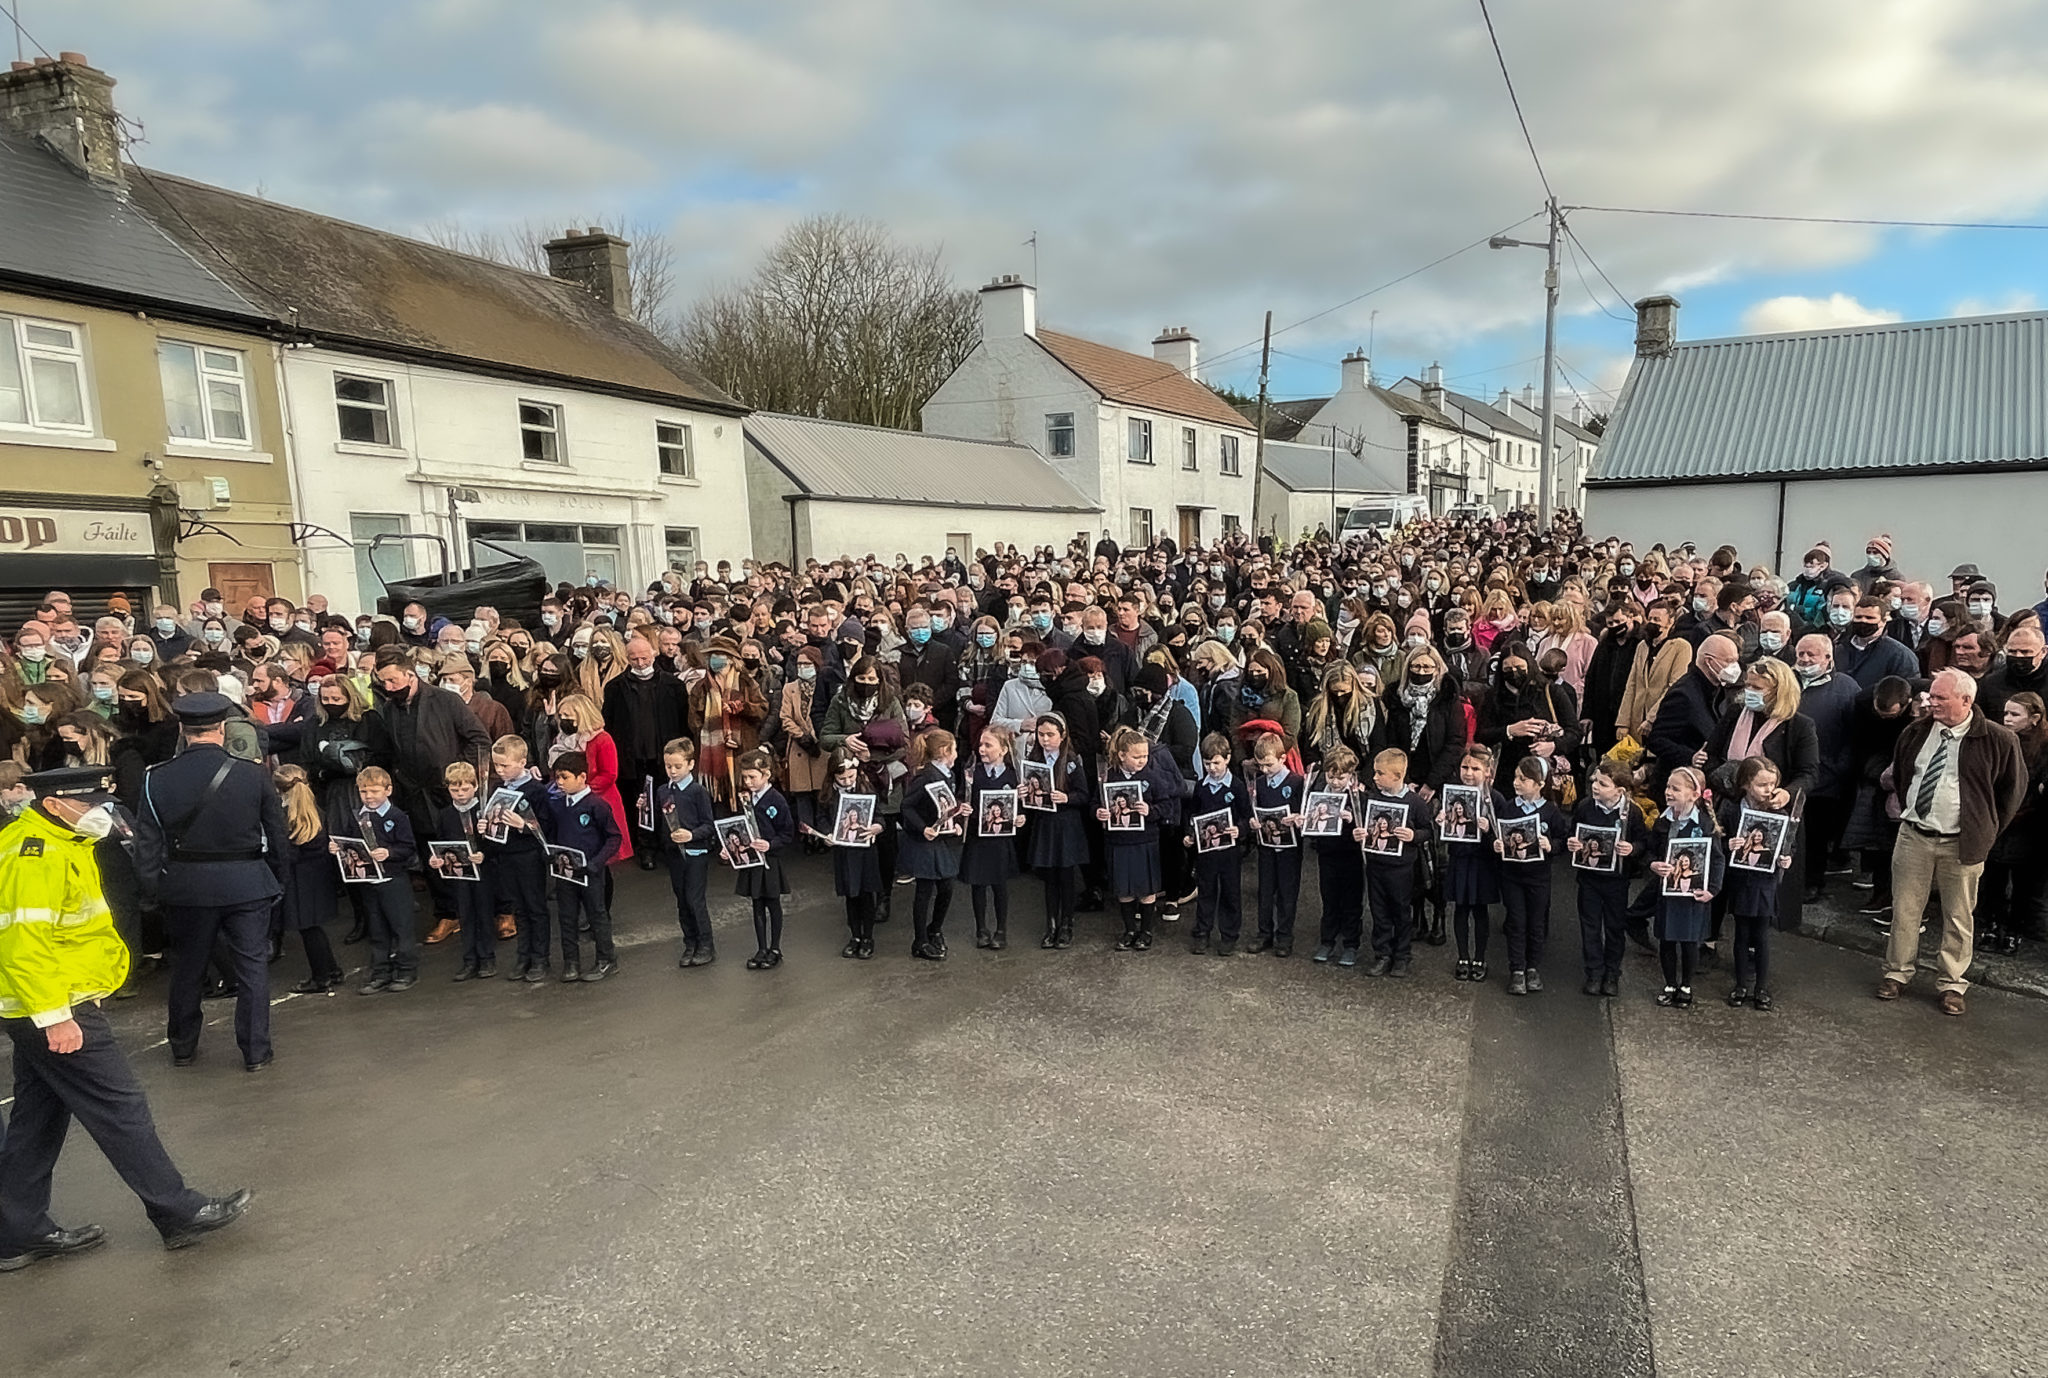 First Class students from Durrow National School outside St. Brigid's Church, Mountbolus, Co. Offaly, holding pictures of their teacher Ashling Murphy